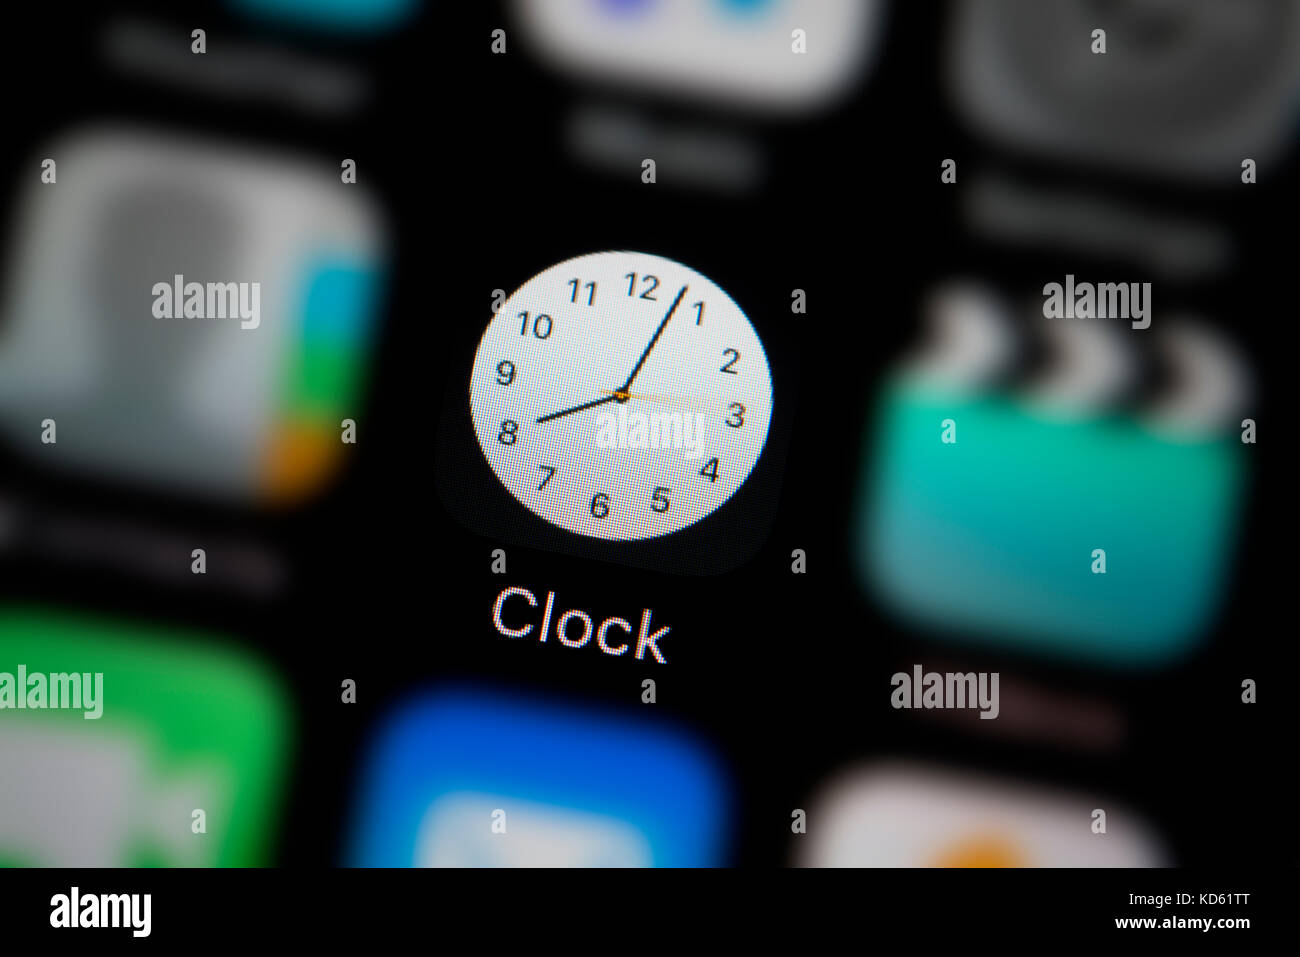 A close-up shot of the Clock app, as seen on the screen of an Apple iPhone (Editorial use only) Stock Photo